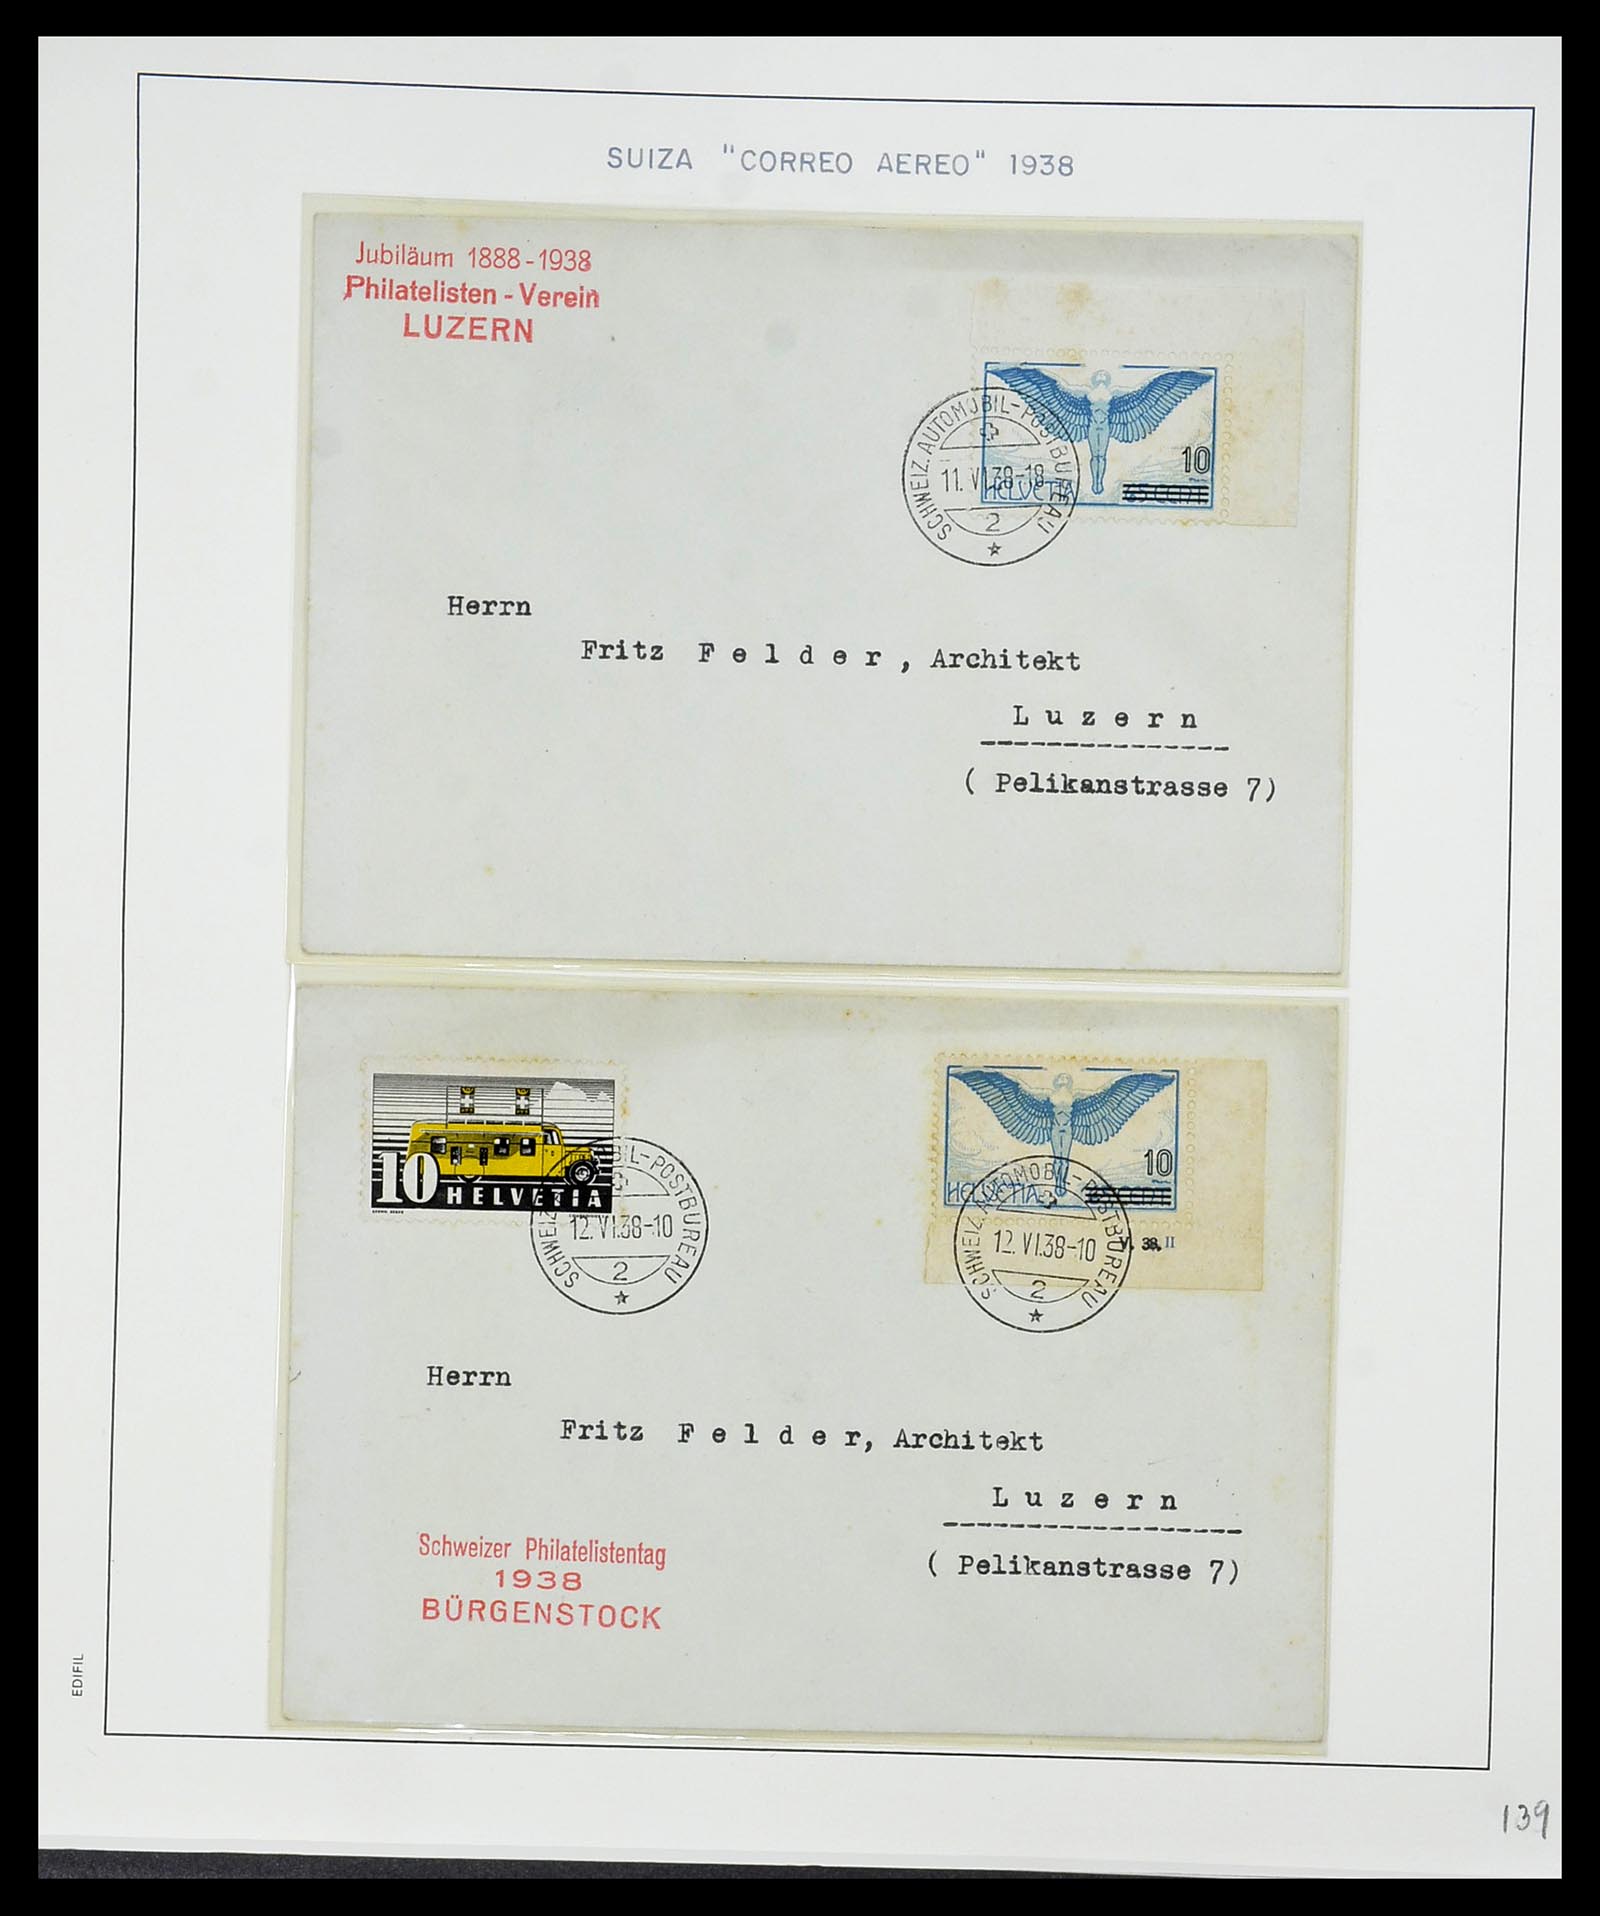 34137 077 - Stamp collection 34137 Switzerland airmail covers 1923-1963.